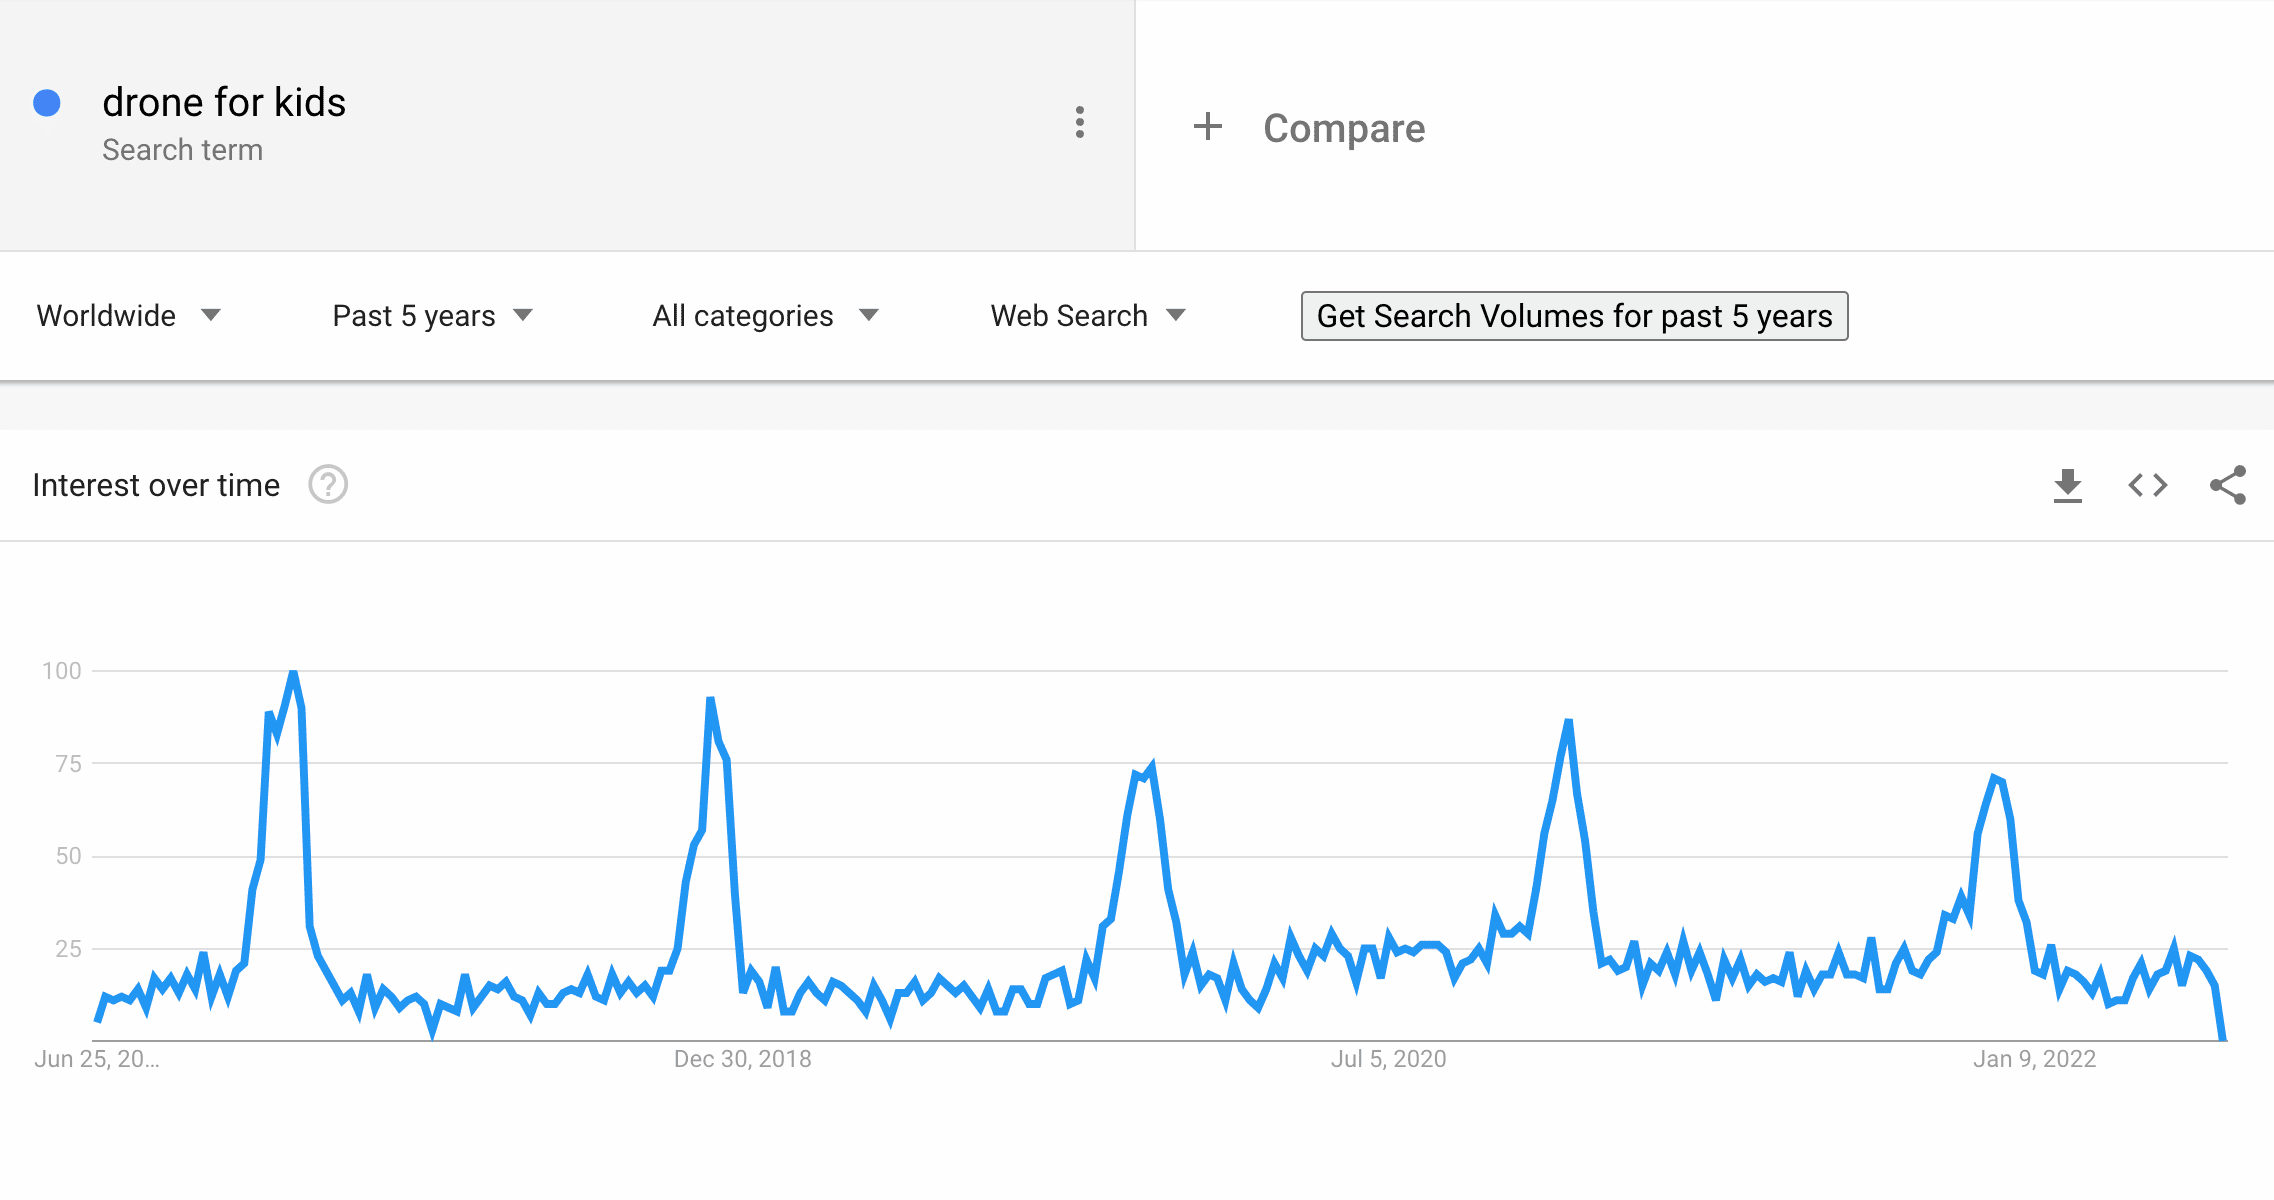 Drones for kids on Google Trends